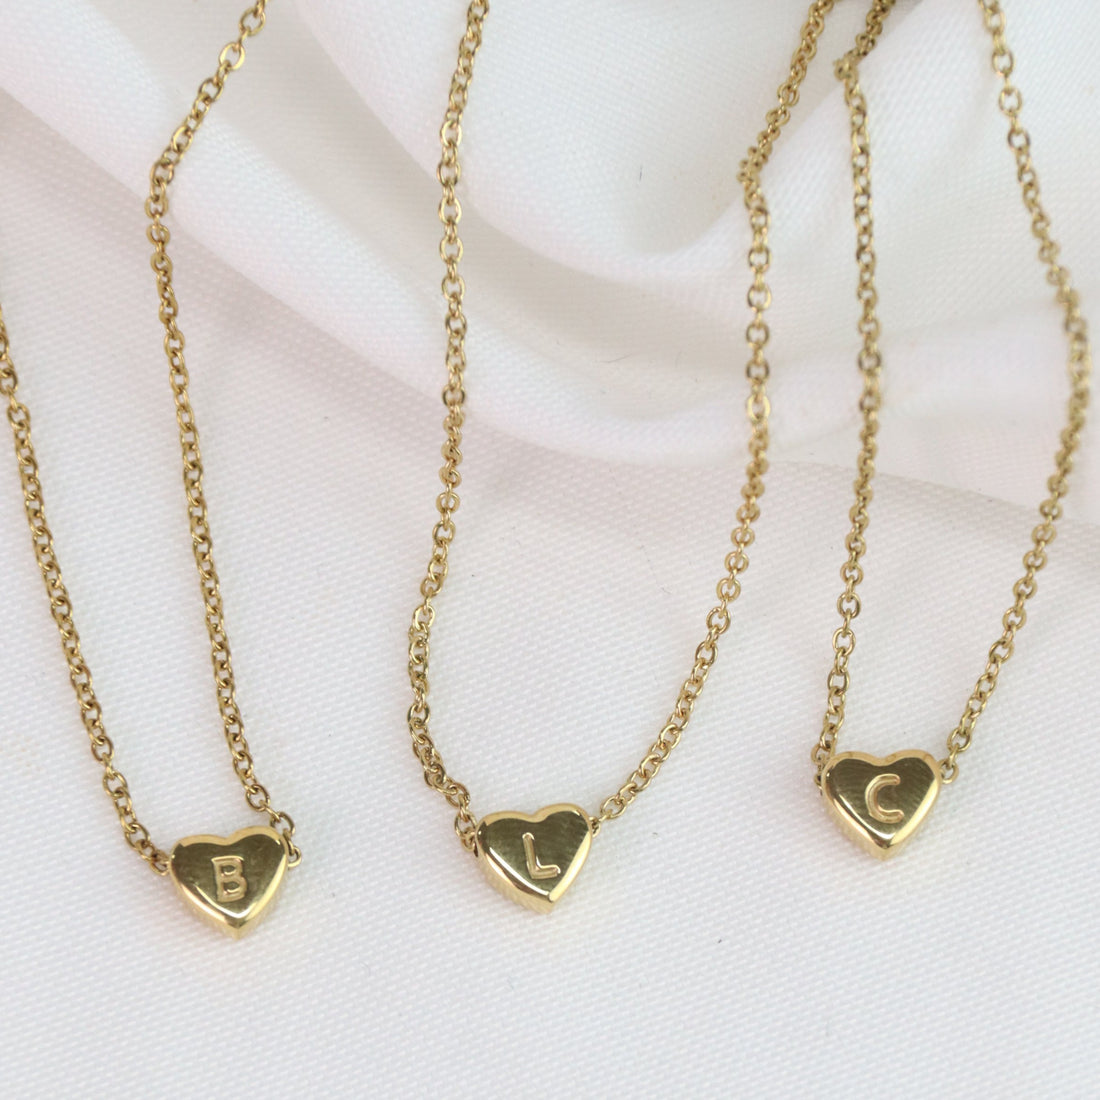 Initial Necklaces - Gold Plated Pendant Necklace